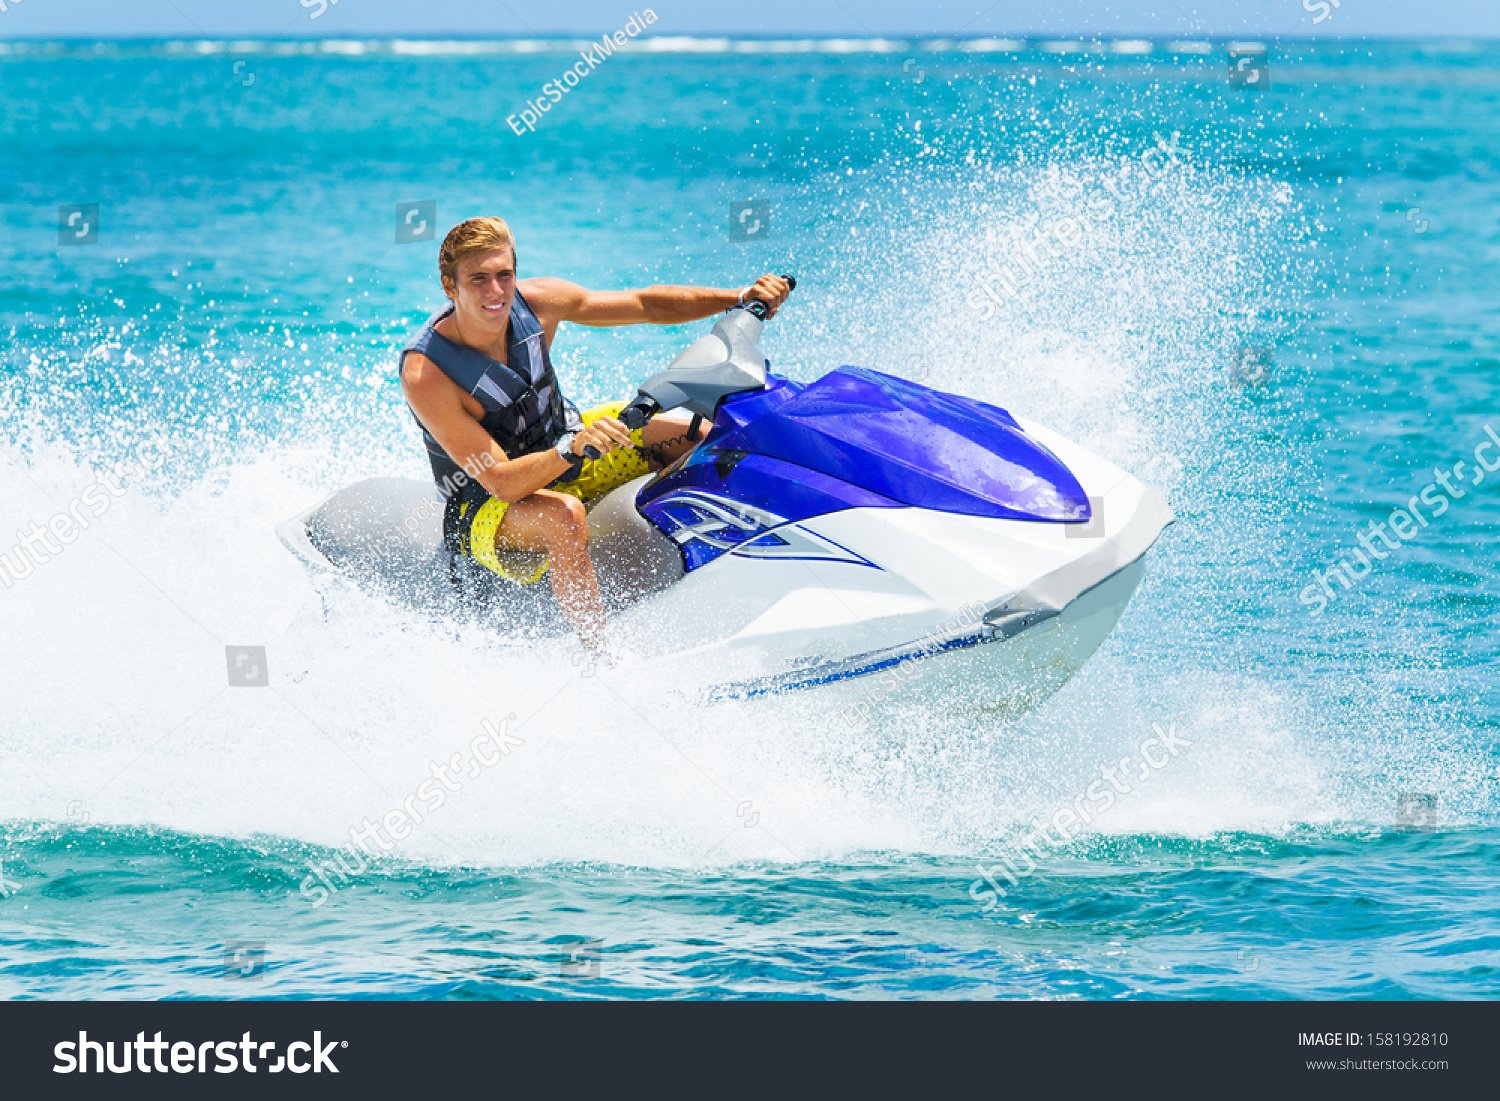 Young Man on Jet Ski, Tropical Ocean, Vacation Concept #158192810